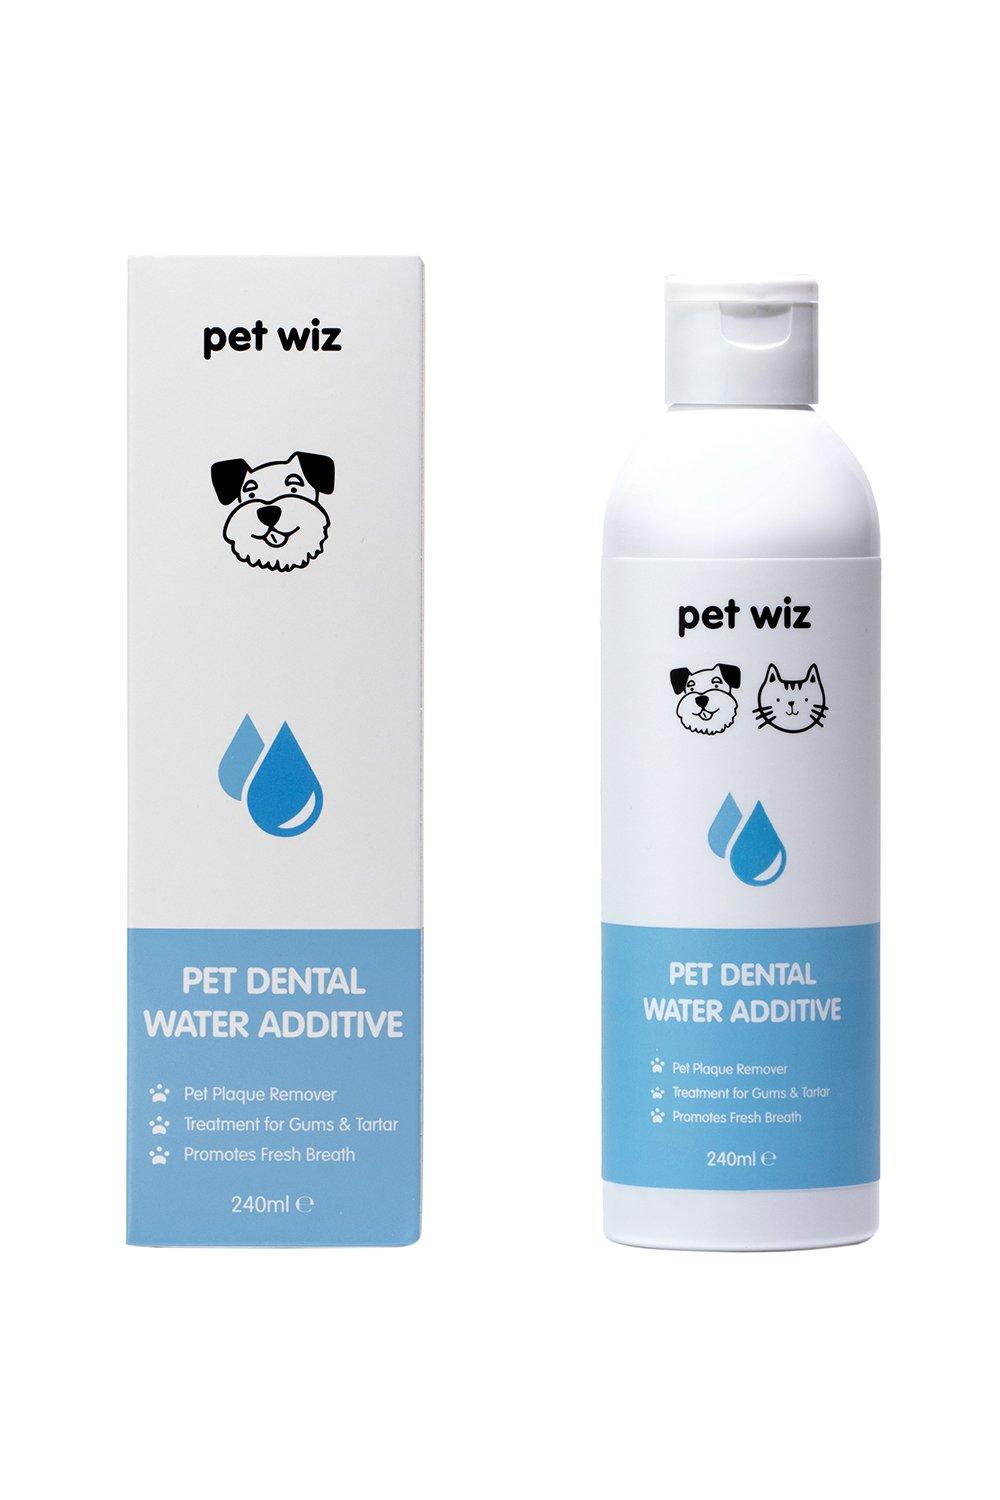 pet wiz Dental Water Additive for Dogs & Cats